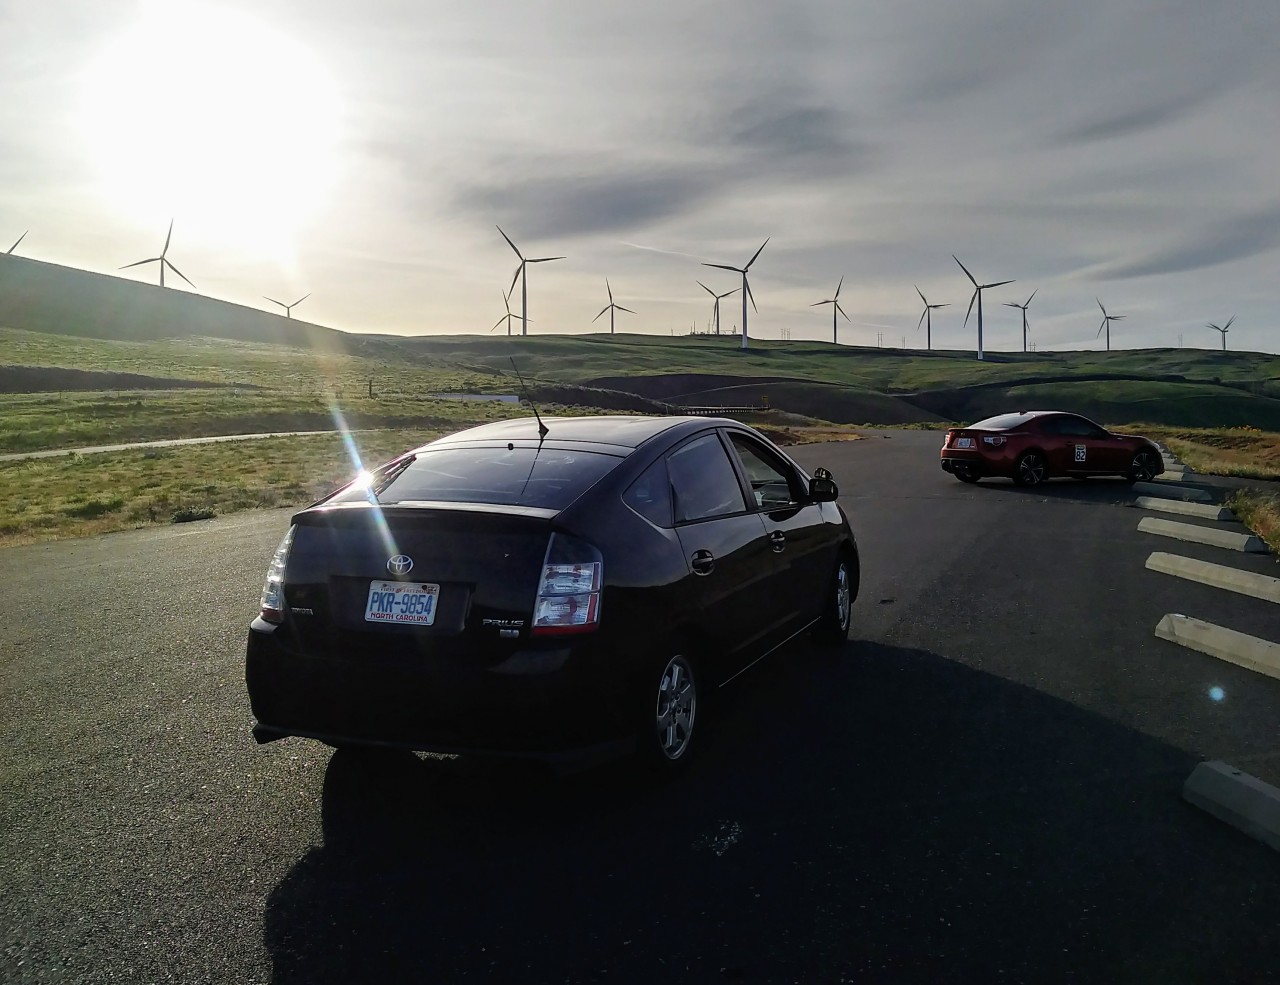 Van Dwelling vs Prius Camping…an Audio Slideshow from the road.